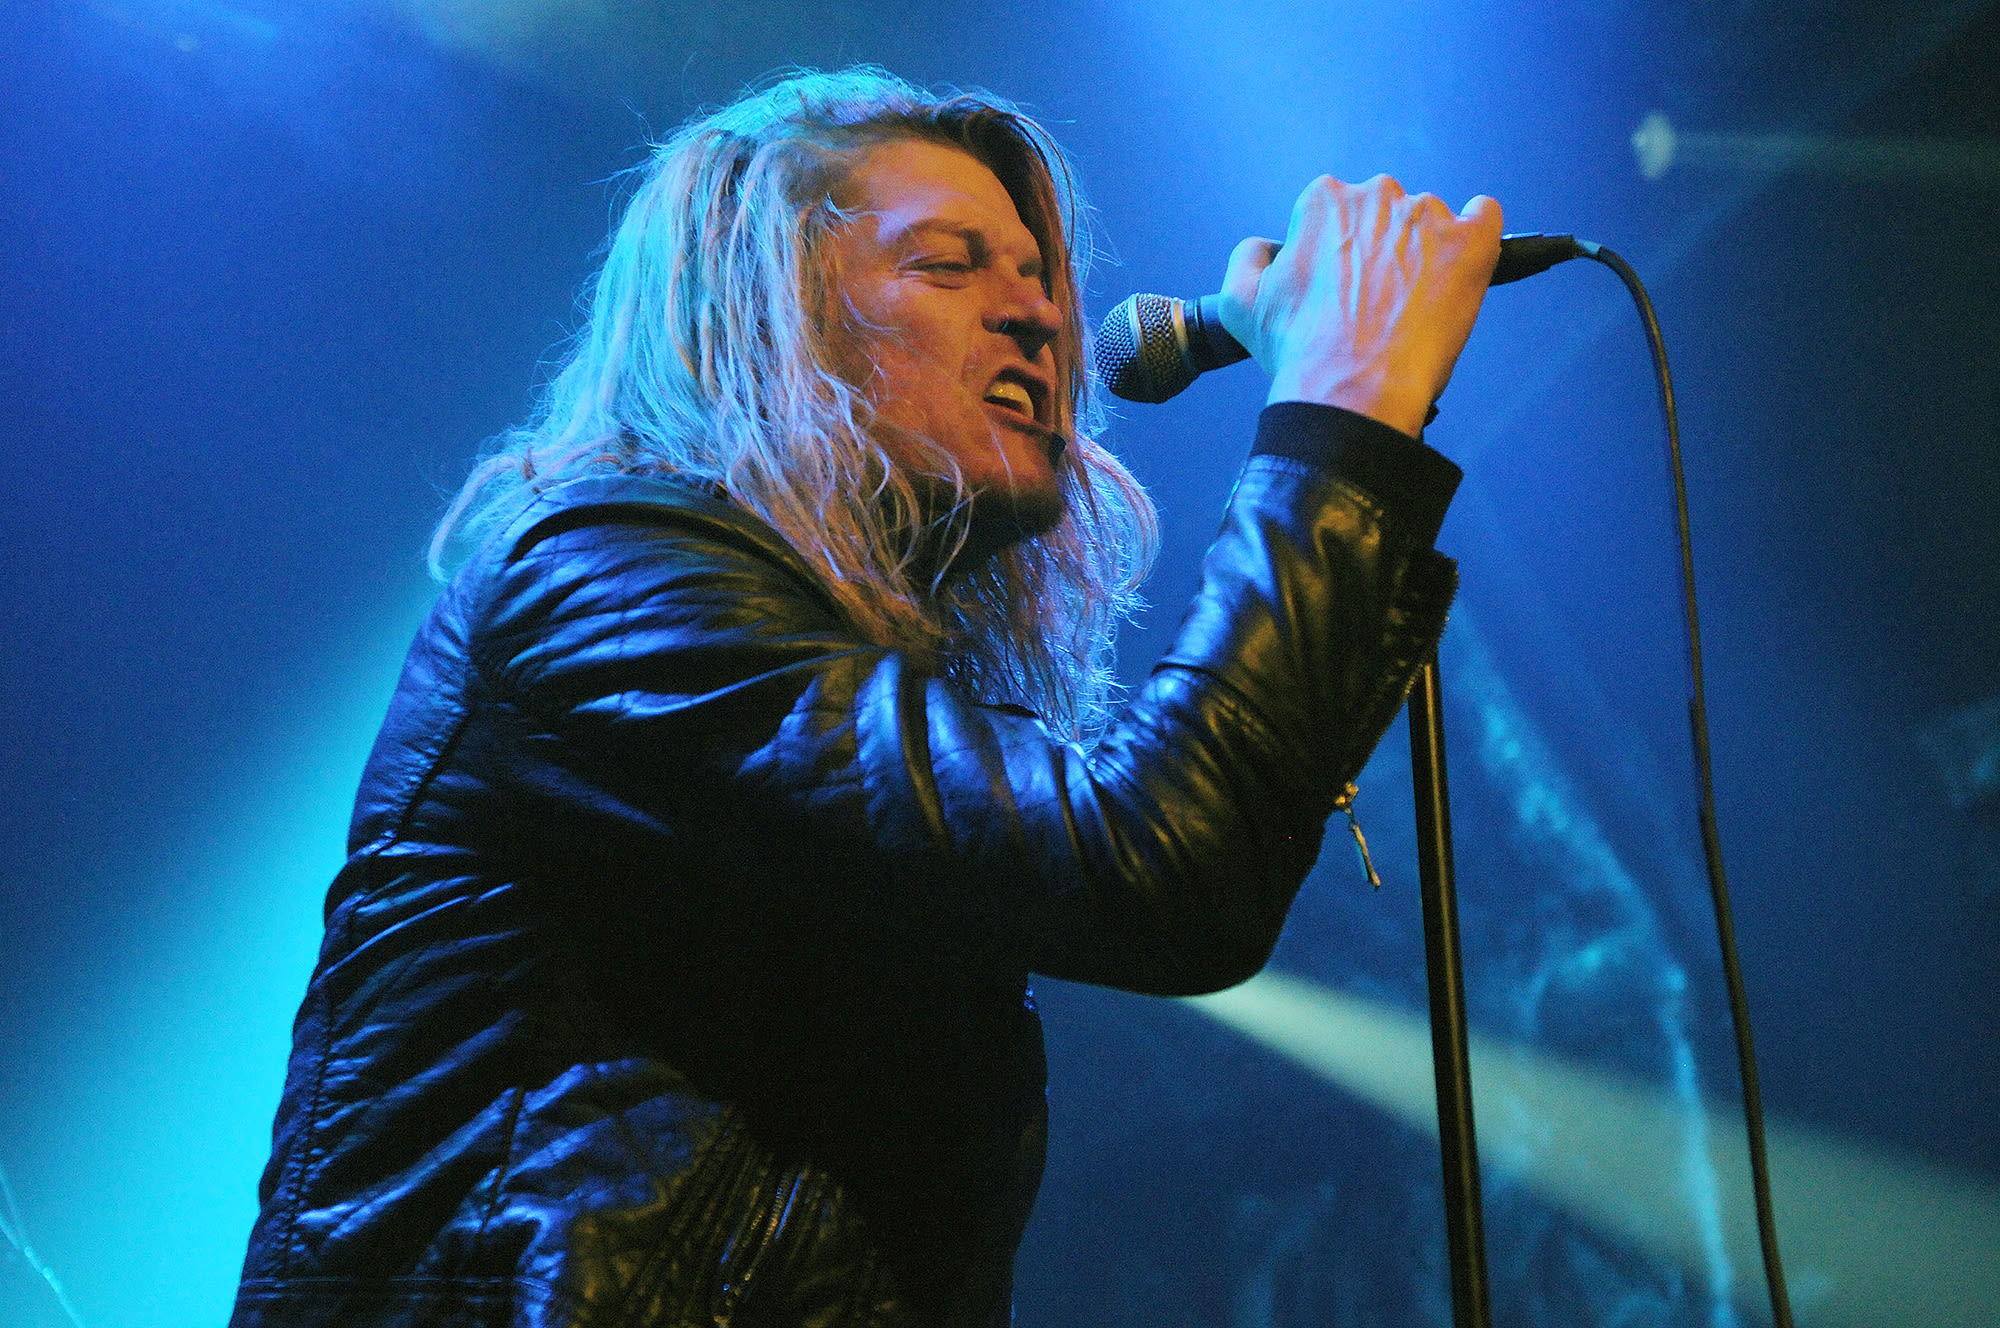 Puddle of Mudd Frontman Pepper-Sprayed, Arrested by Burbank Police Following Standoff